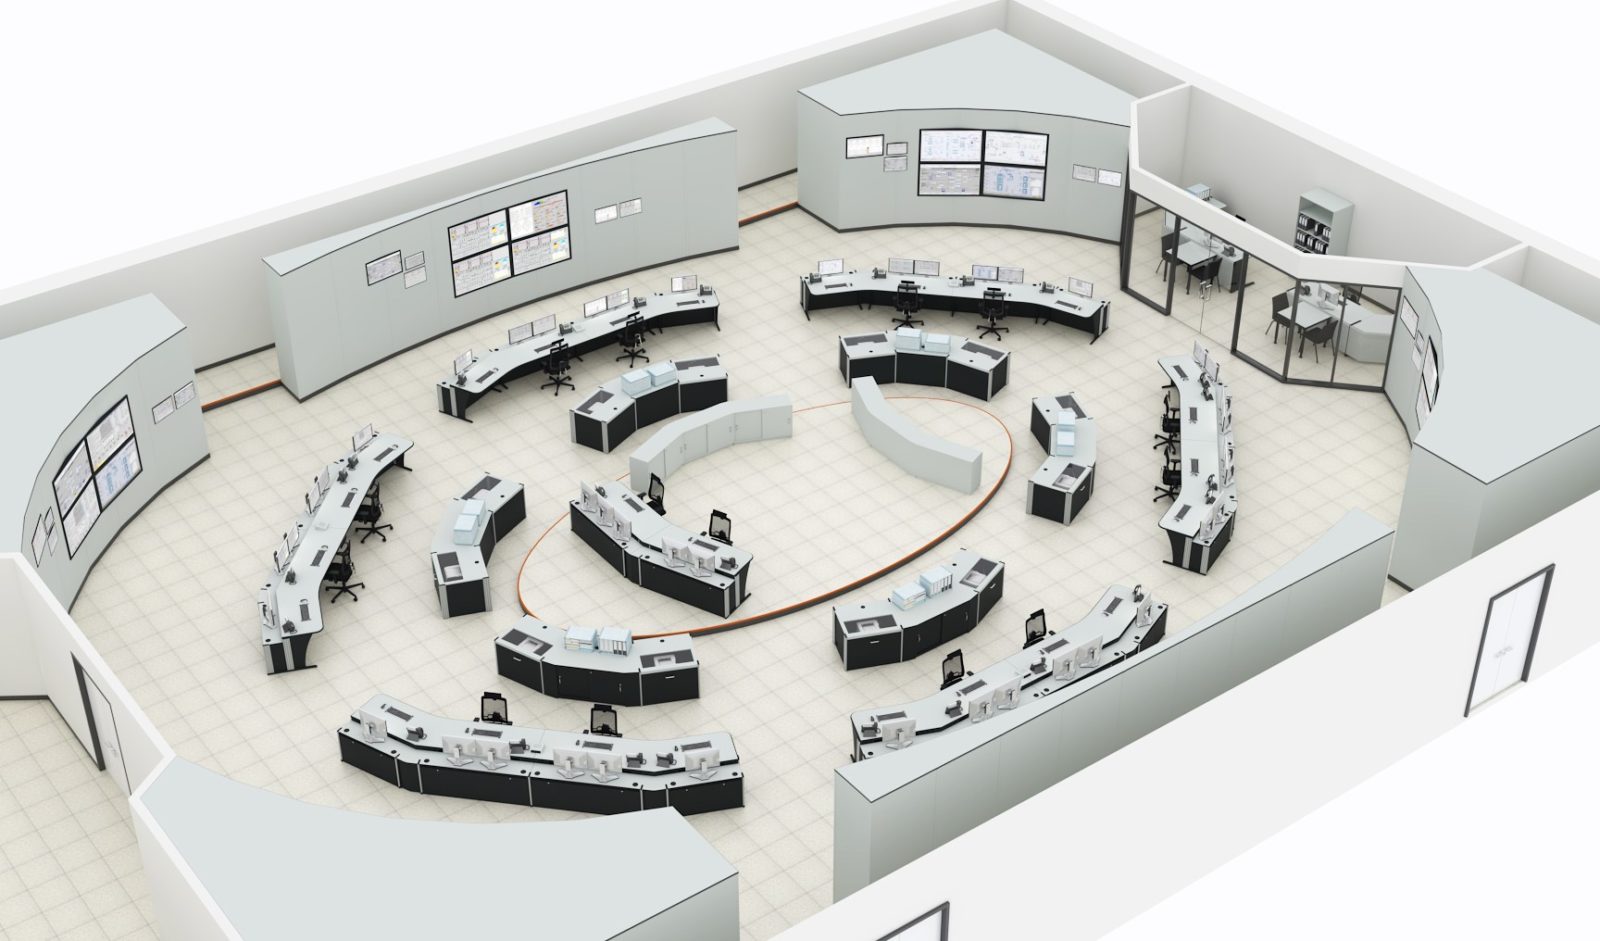 Graphic 3-D illustration of control room floor plan with Dacobas workstations